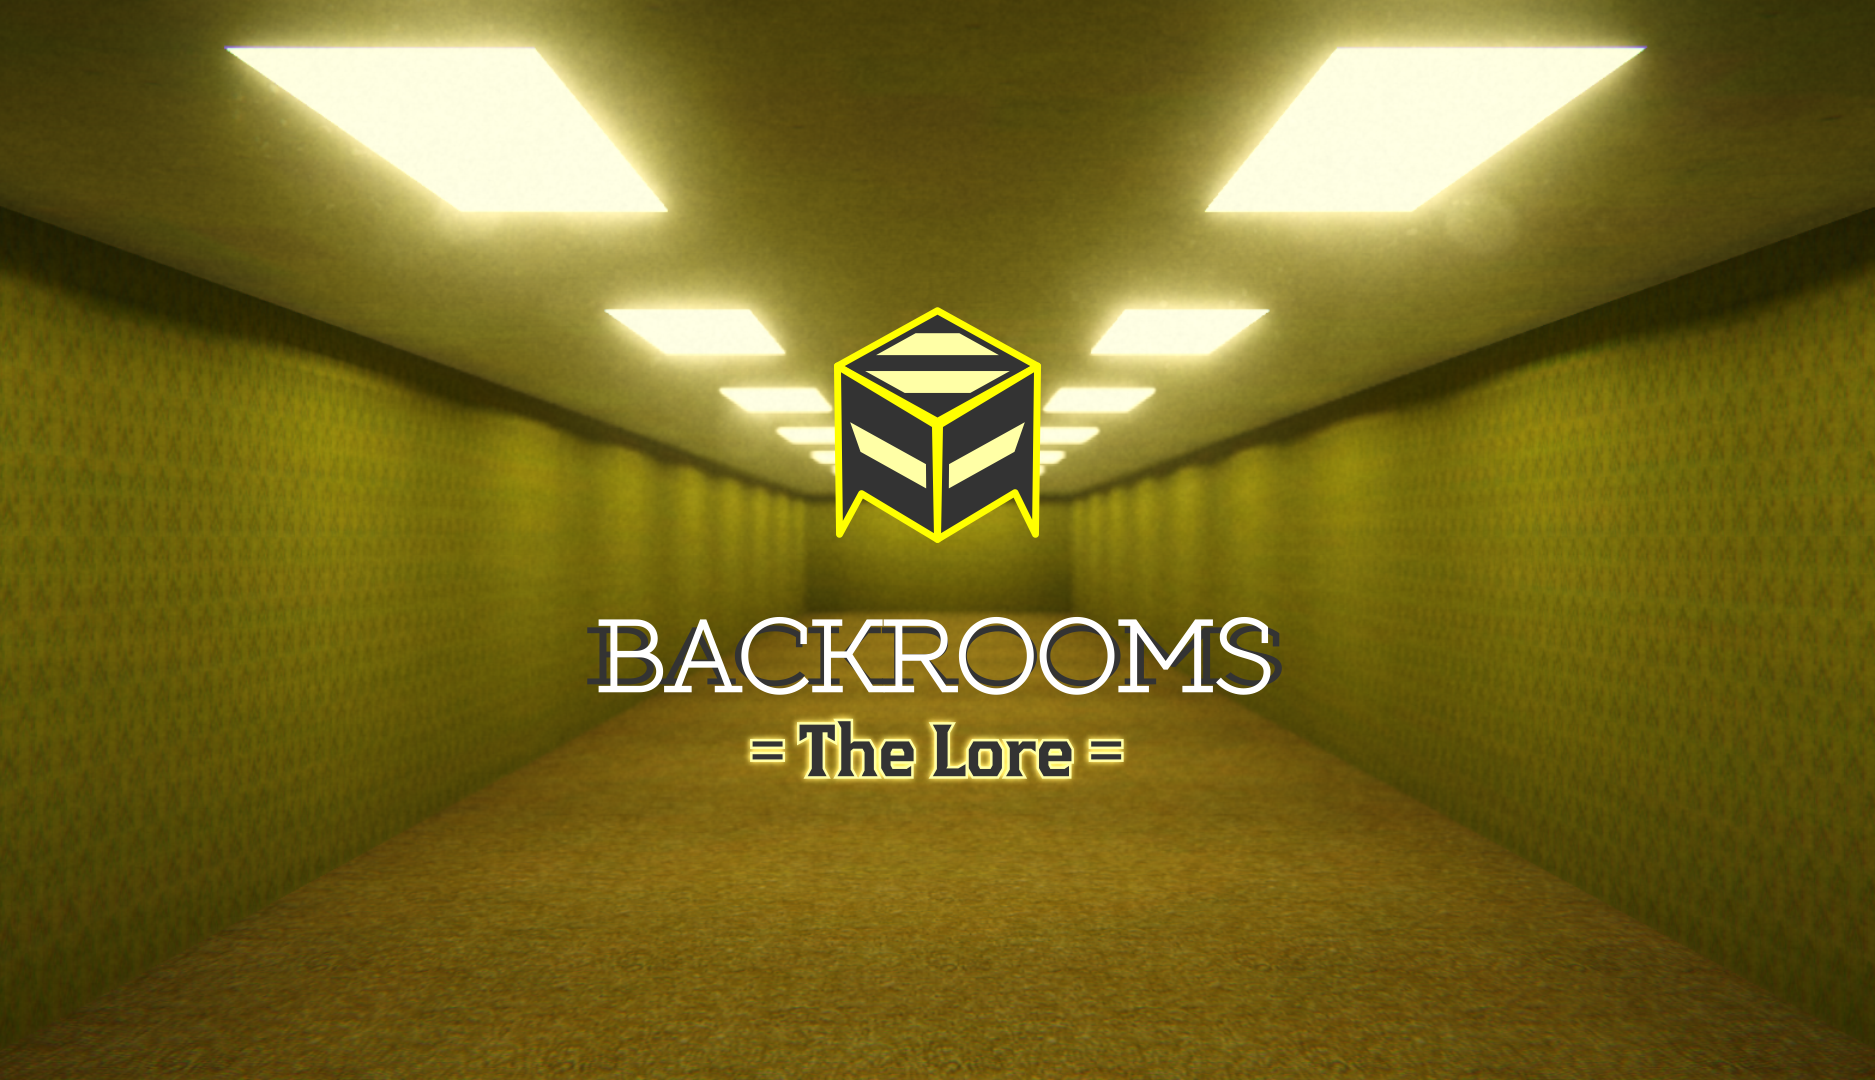 Level 432 - The Backrooms